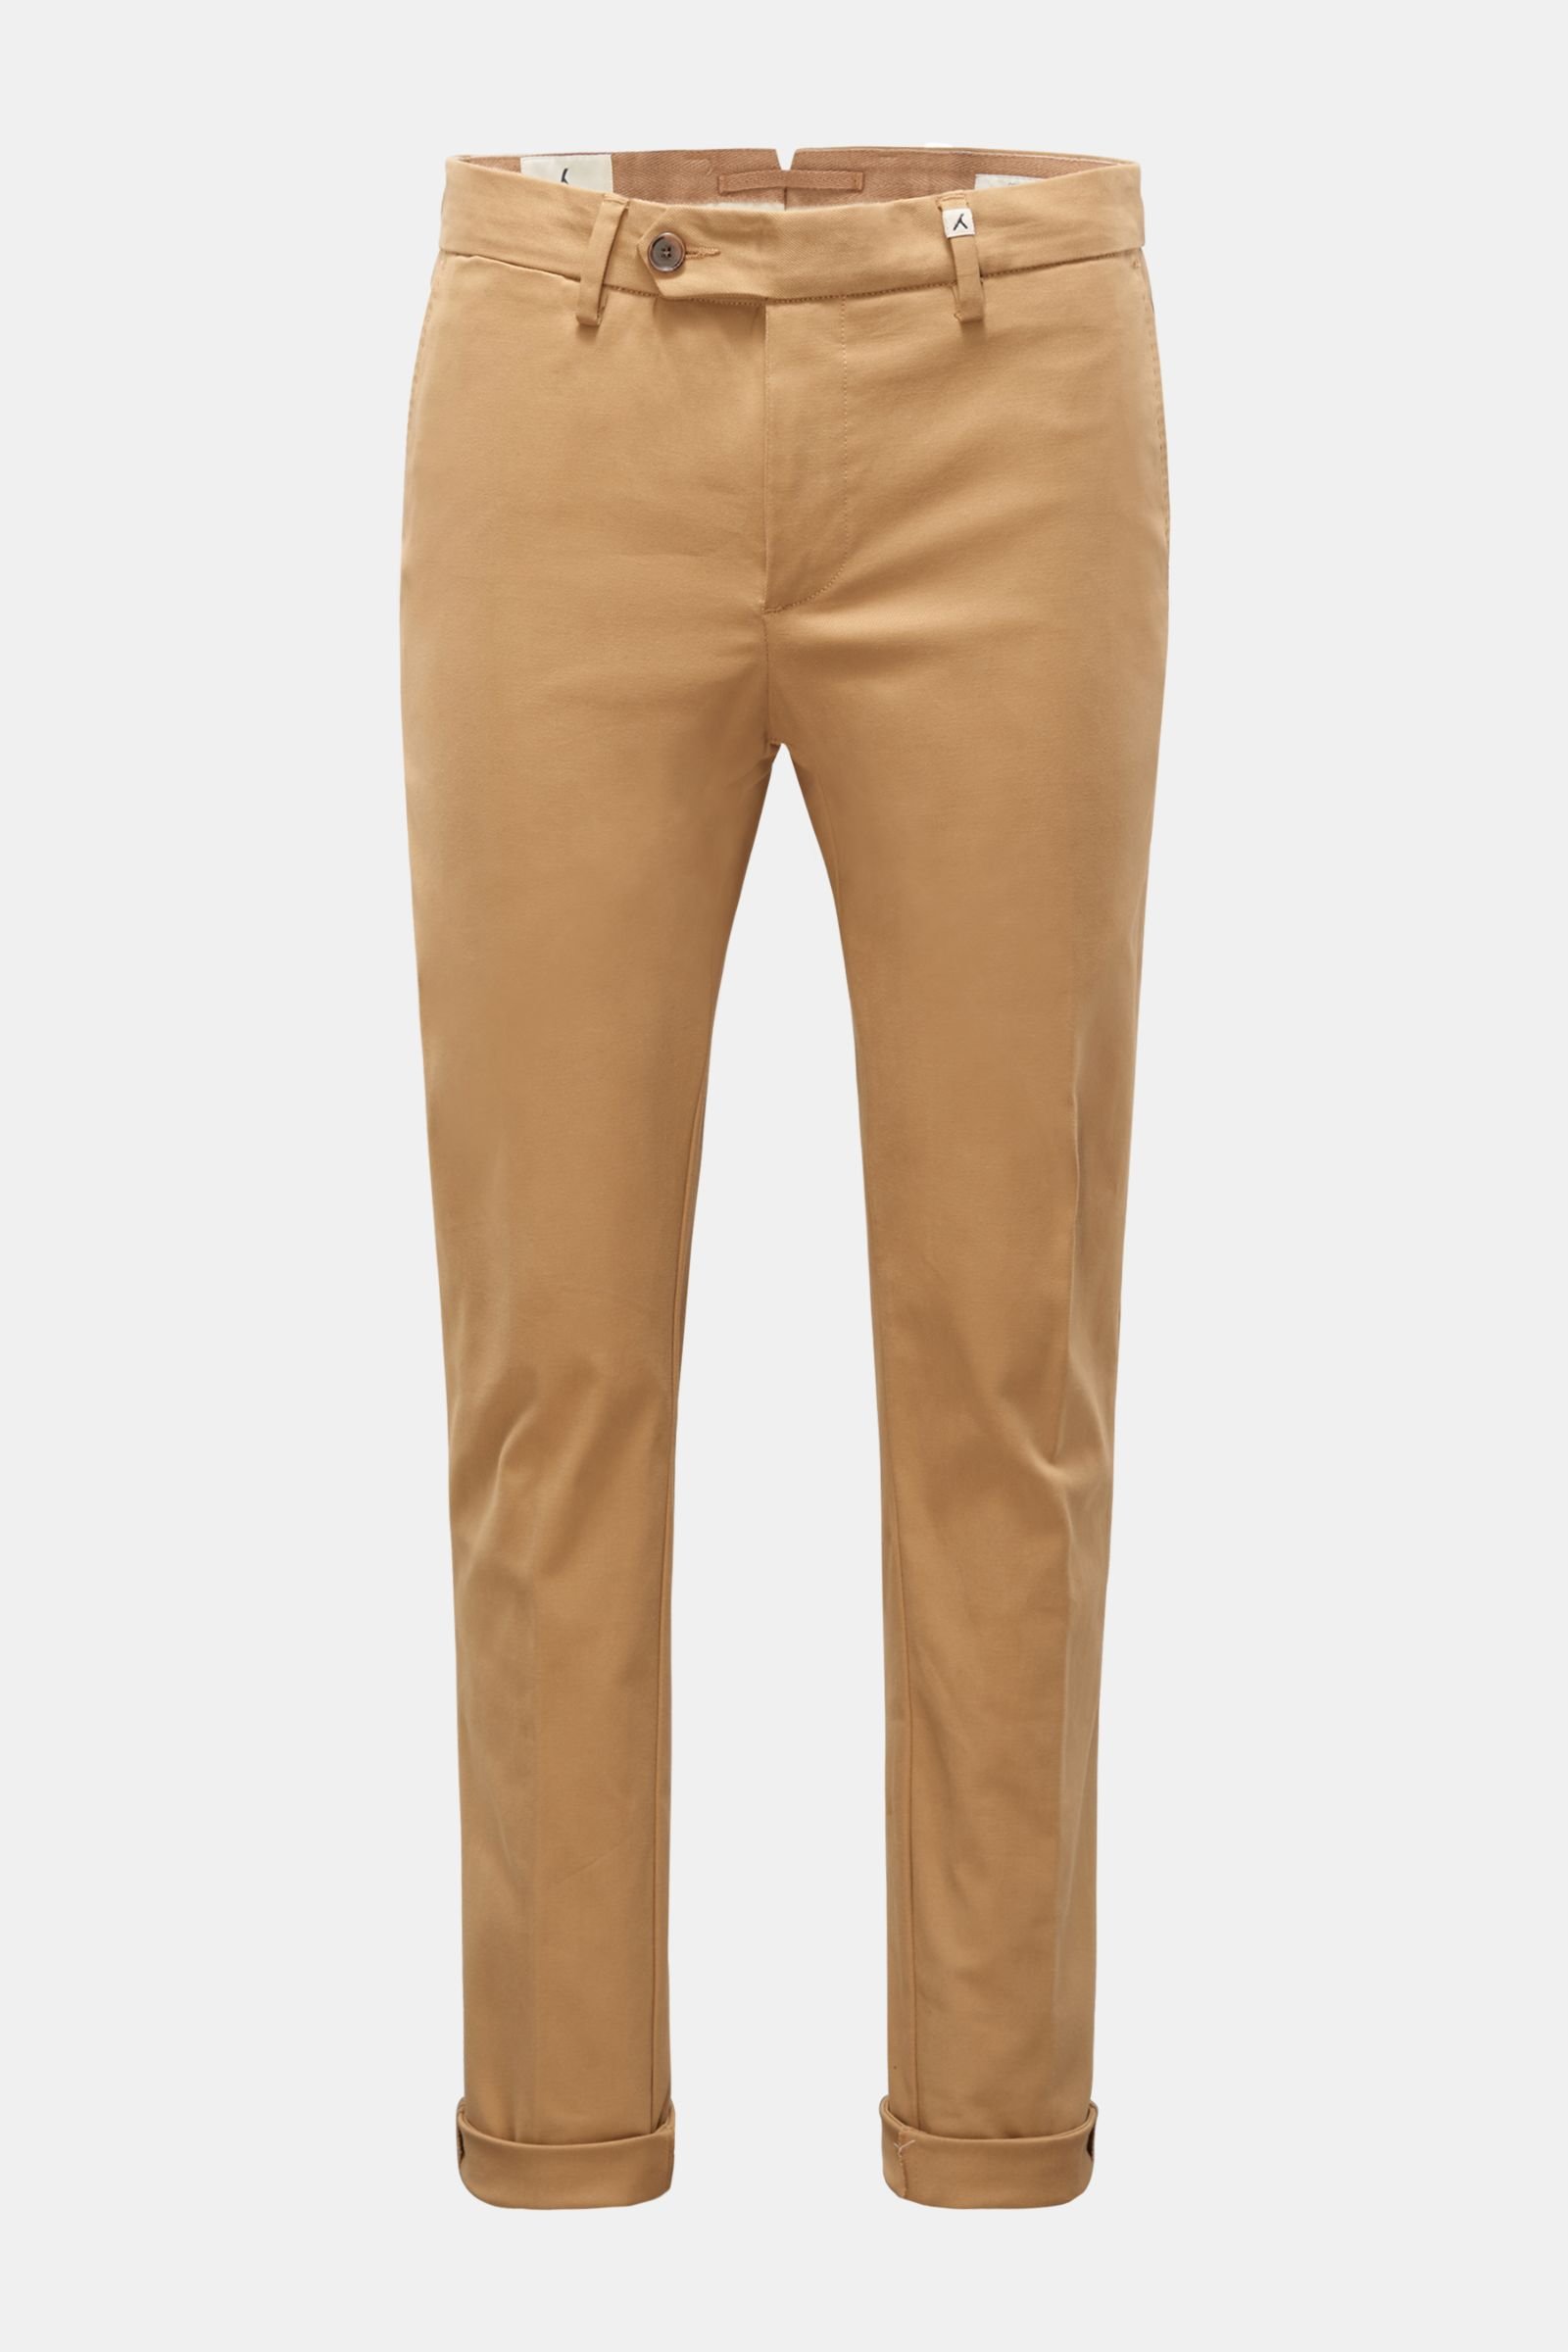 Cotton trousers 'Contemporary' light brown